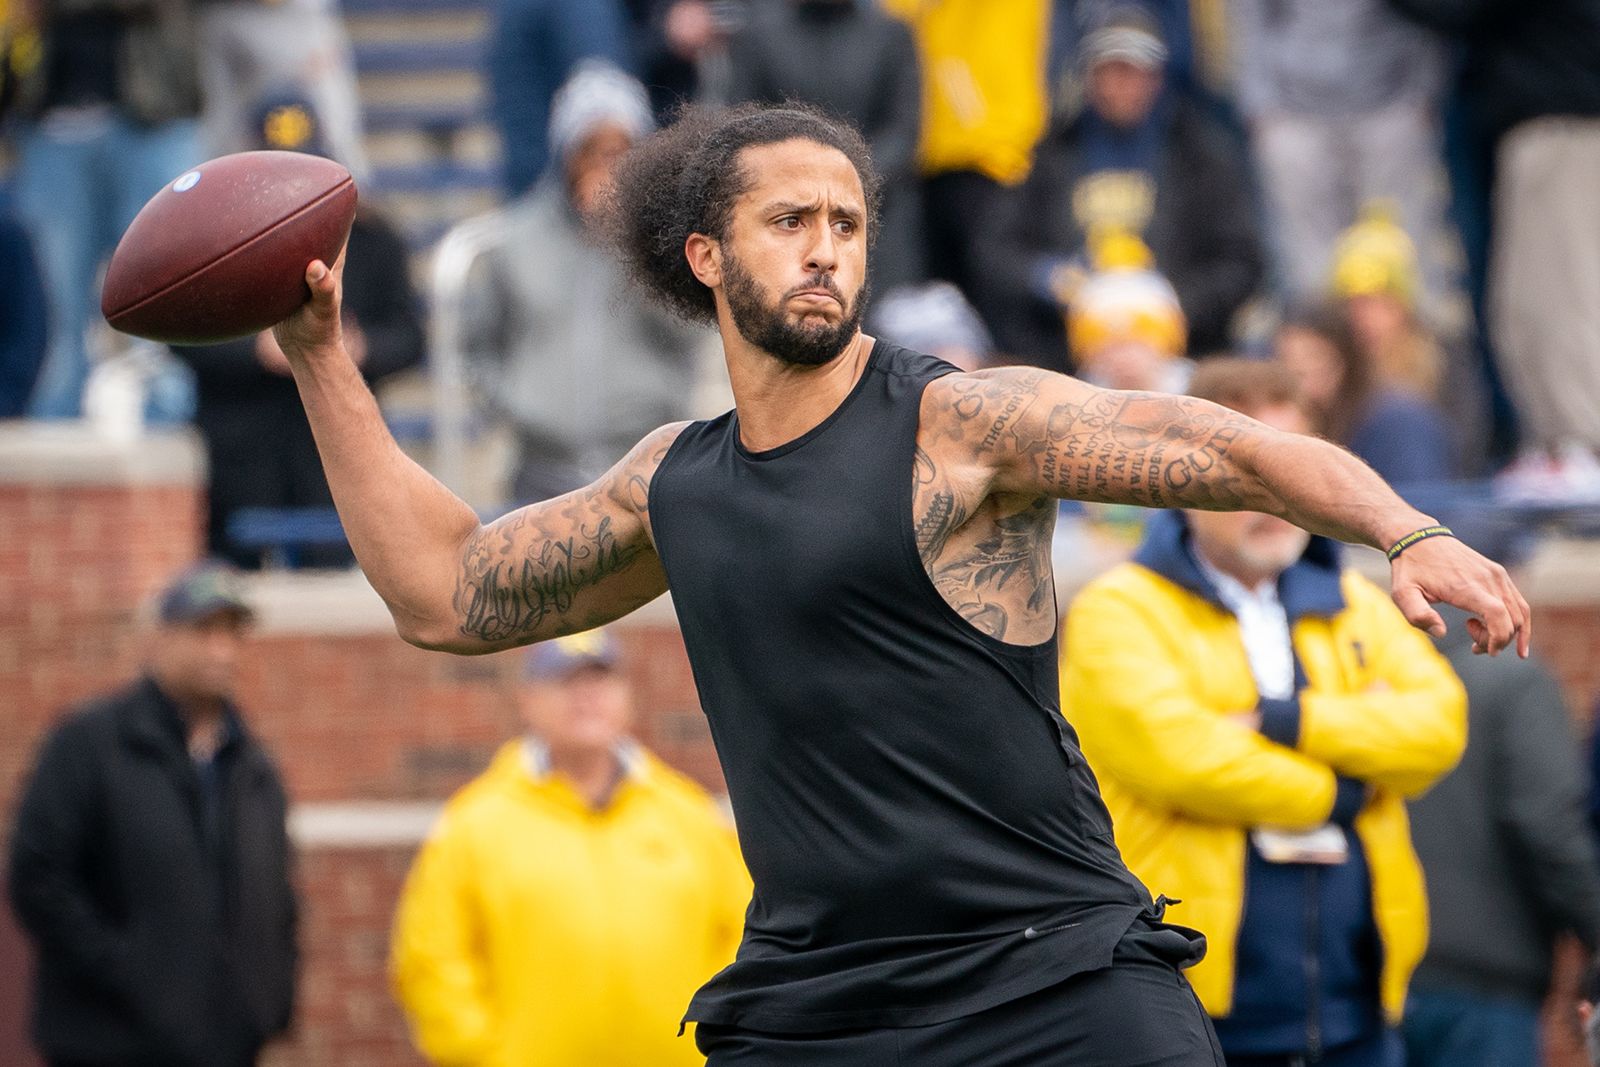 Colin Kaepernick writes letter to NY Jets offering to join while